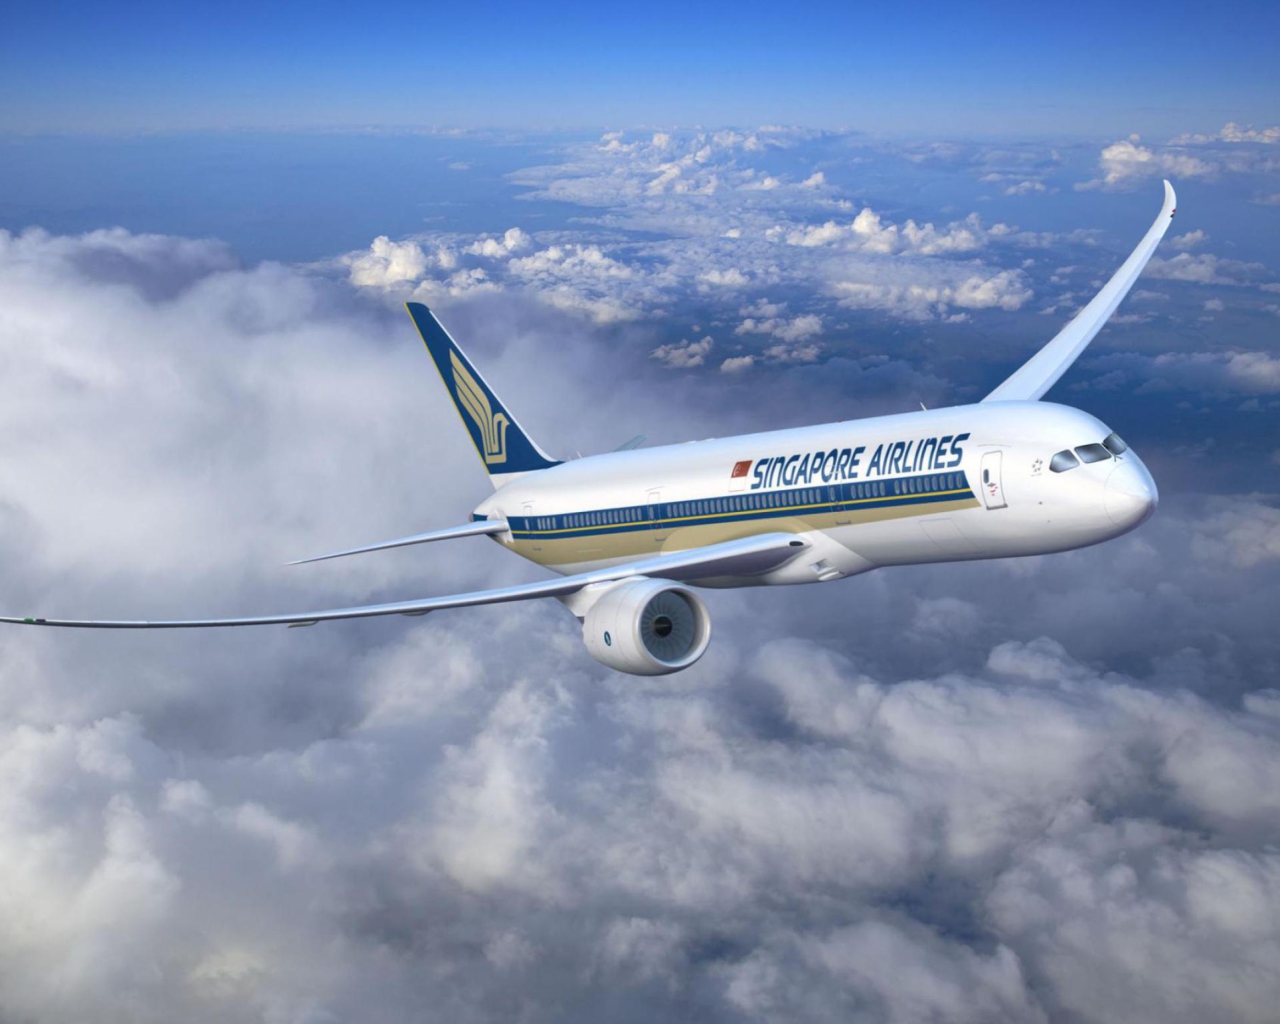 Singapore Airlines wallpaper 1280x1024